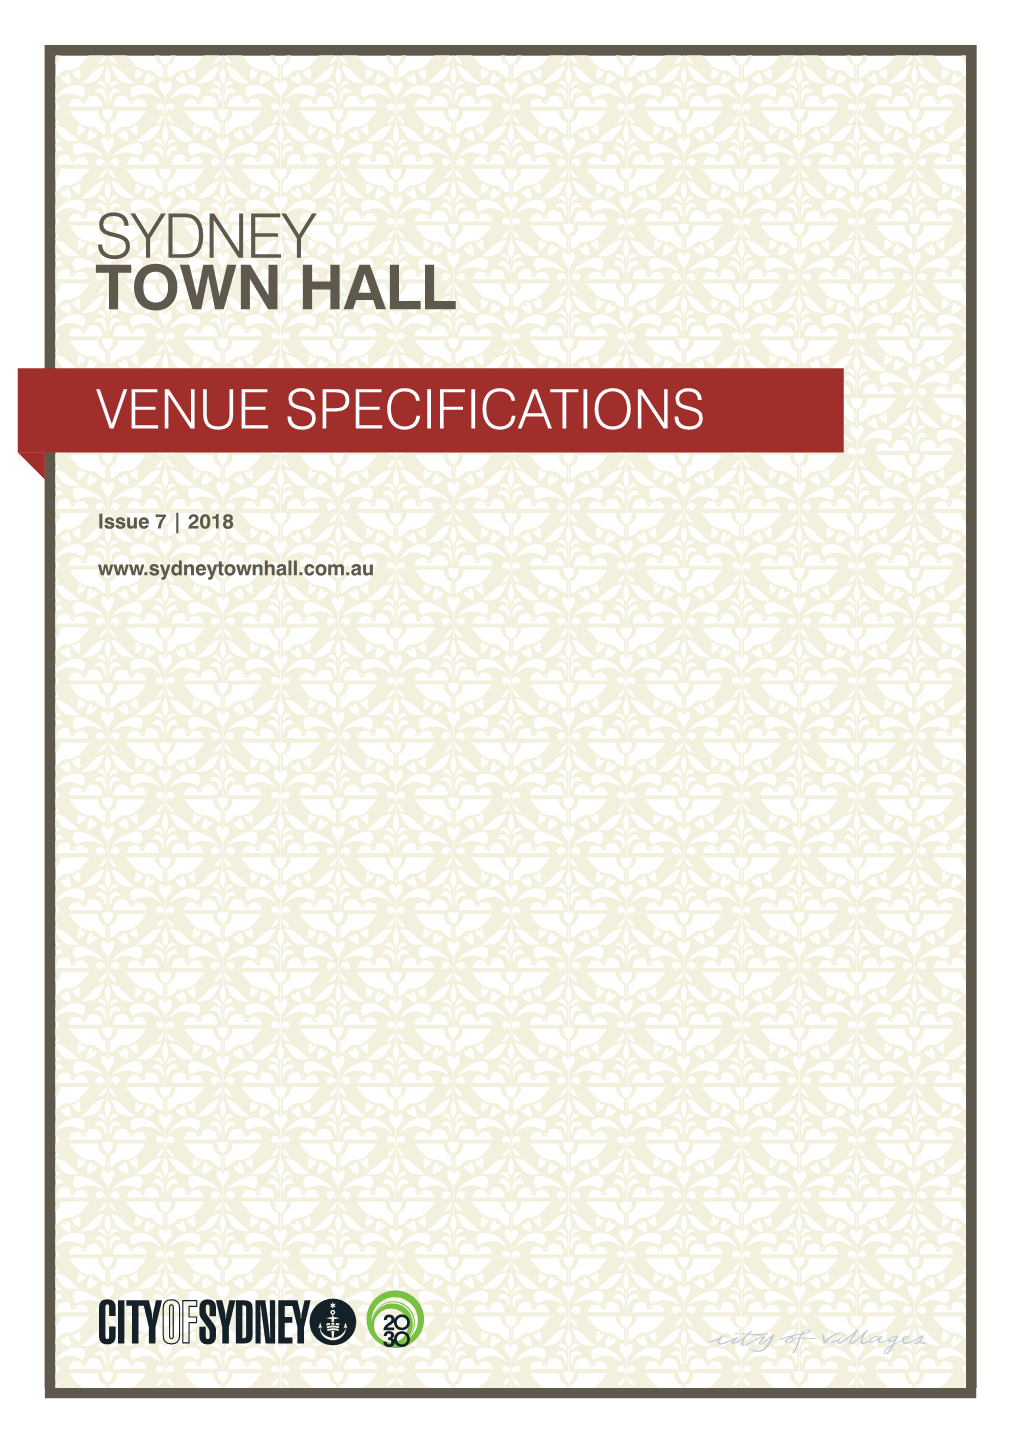 Sydney Town Hall Venue Specifications Document Is a Comprehensive Guide to Organising an Event at the Sydney Town Hall